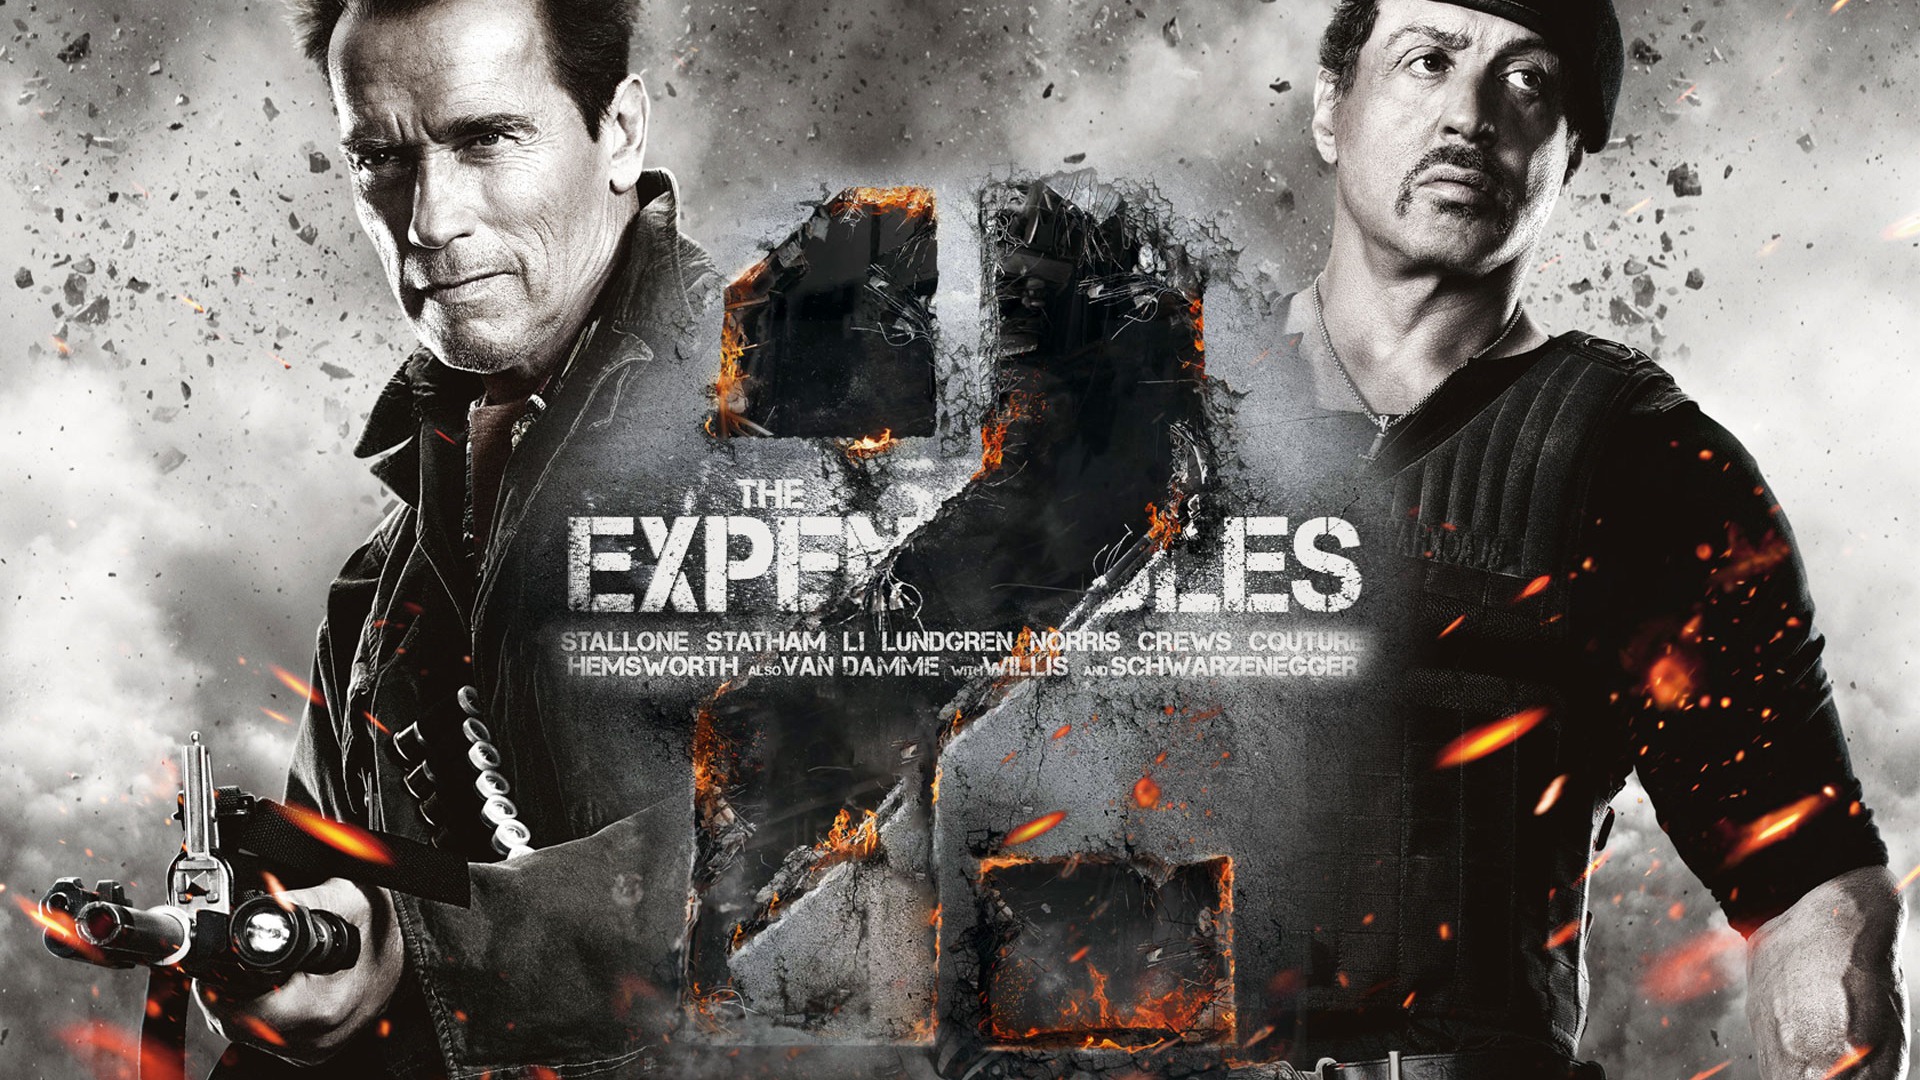 2012 The Expendables 2 HD Wallpaper #1 - 1920x1080